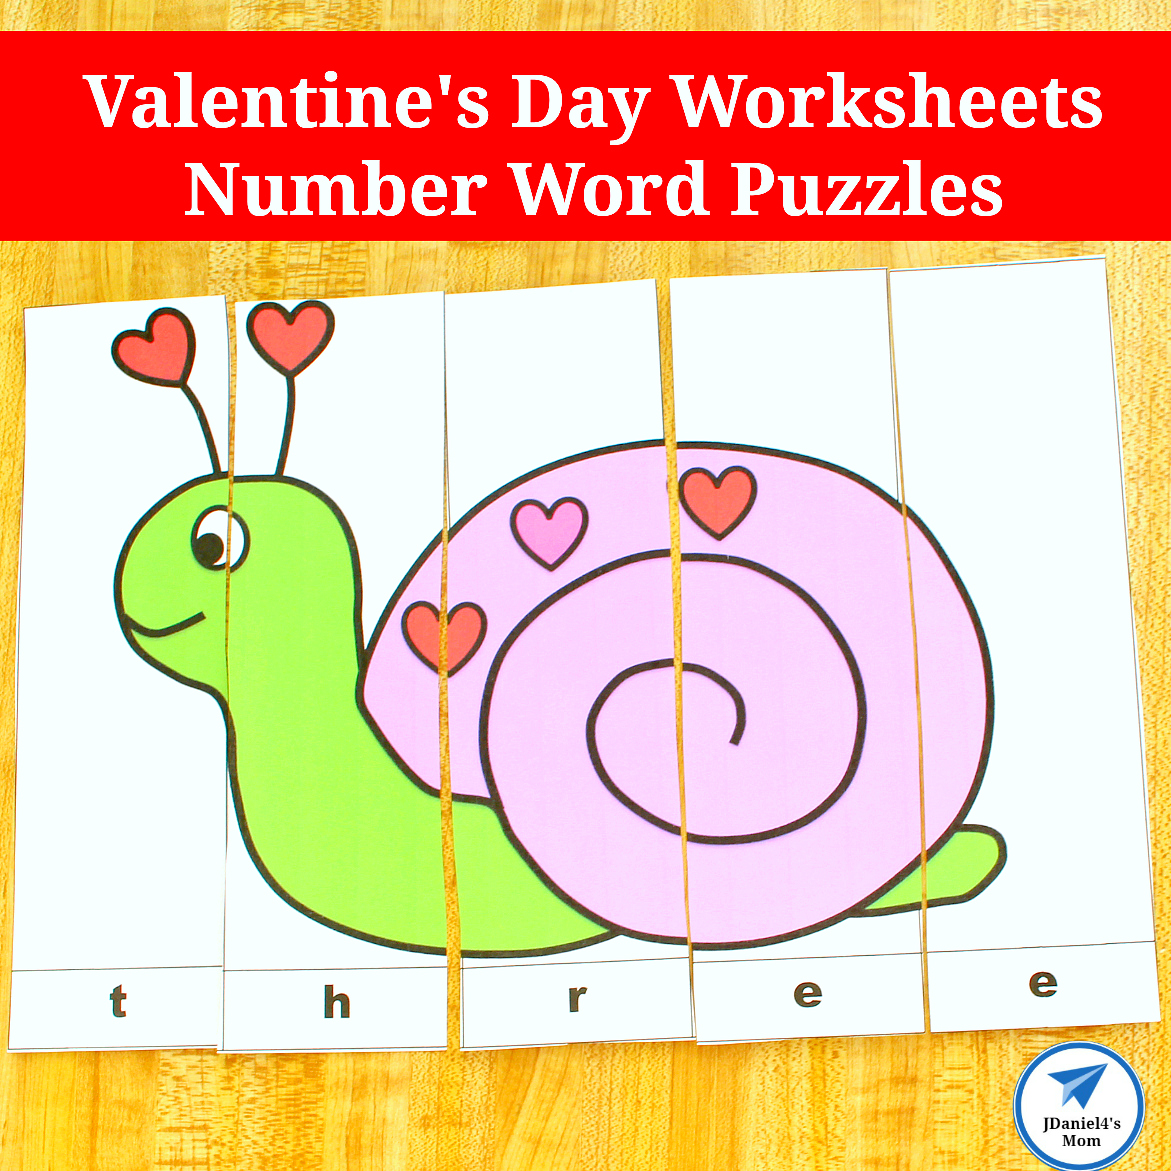 valentine-s-day-worksheets-number-word-puzzles-jdaniel4s-mom